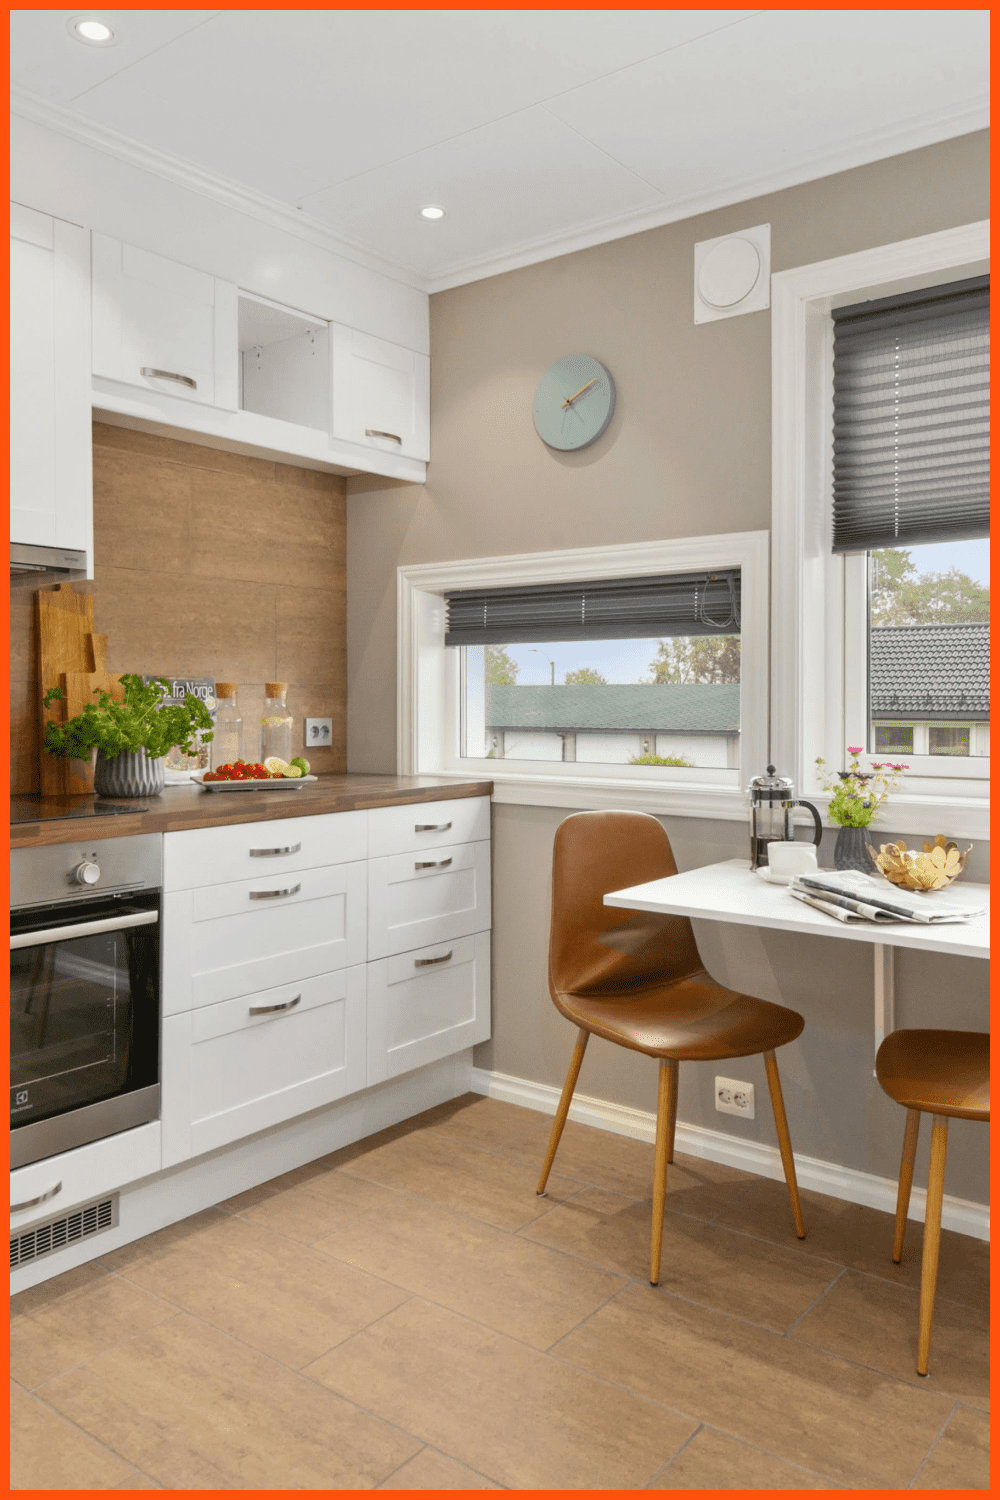 Background in the form of a spacious bright kitchen.